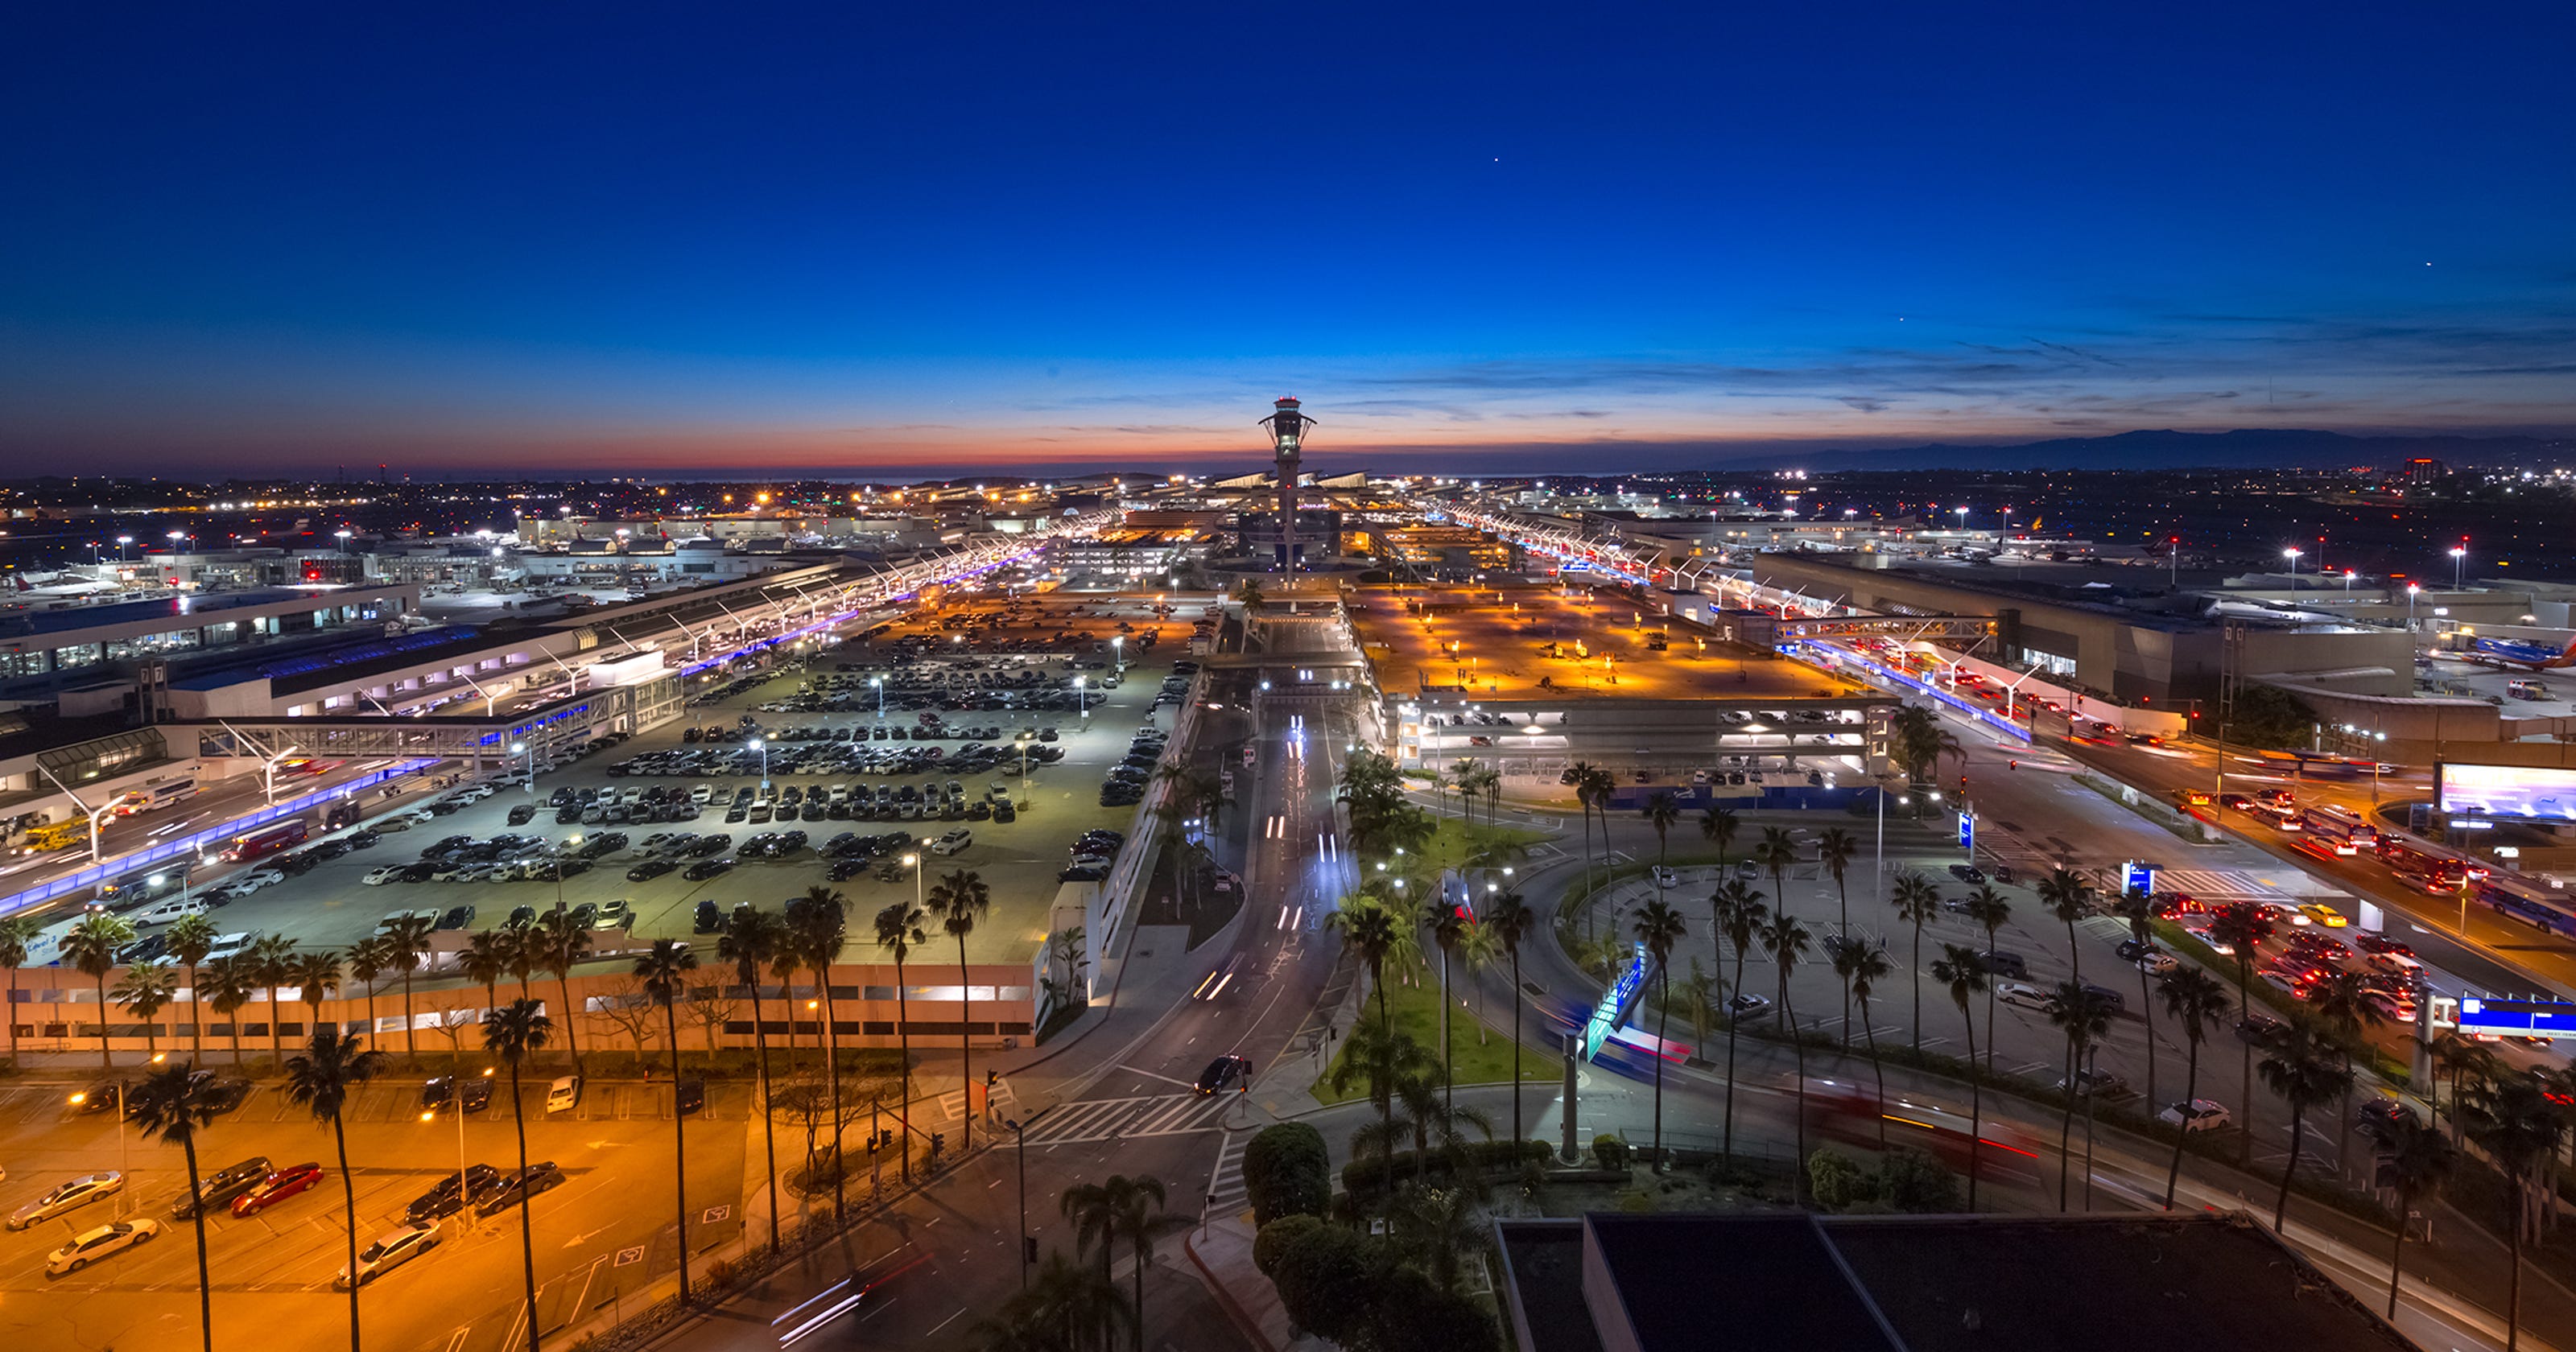 lax airport tourist attractions